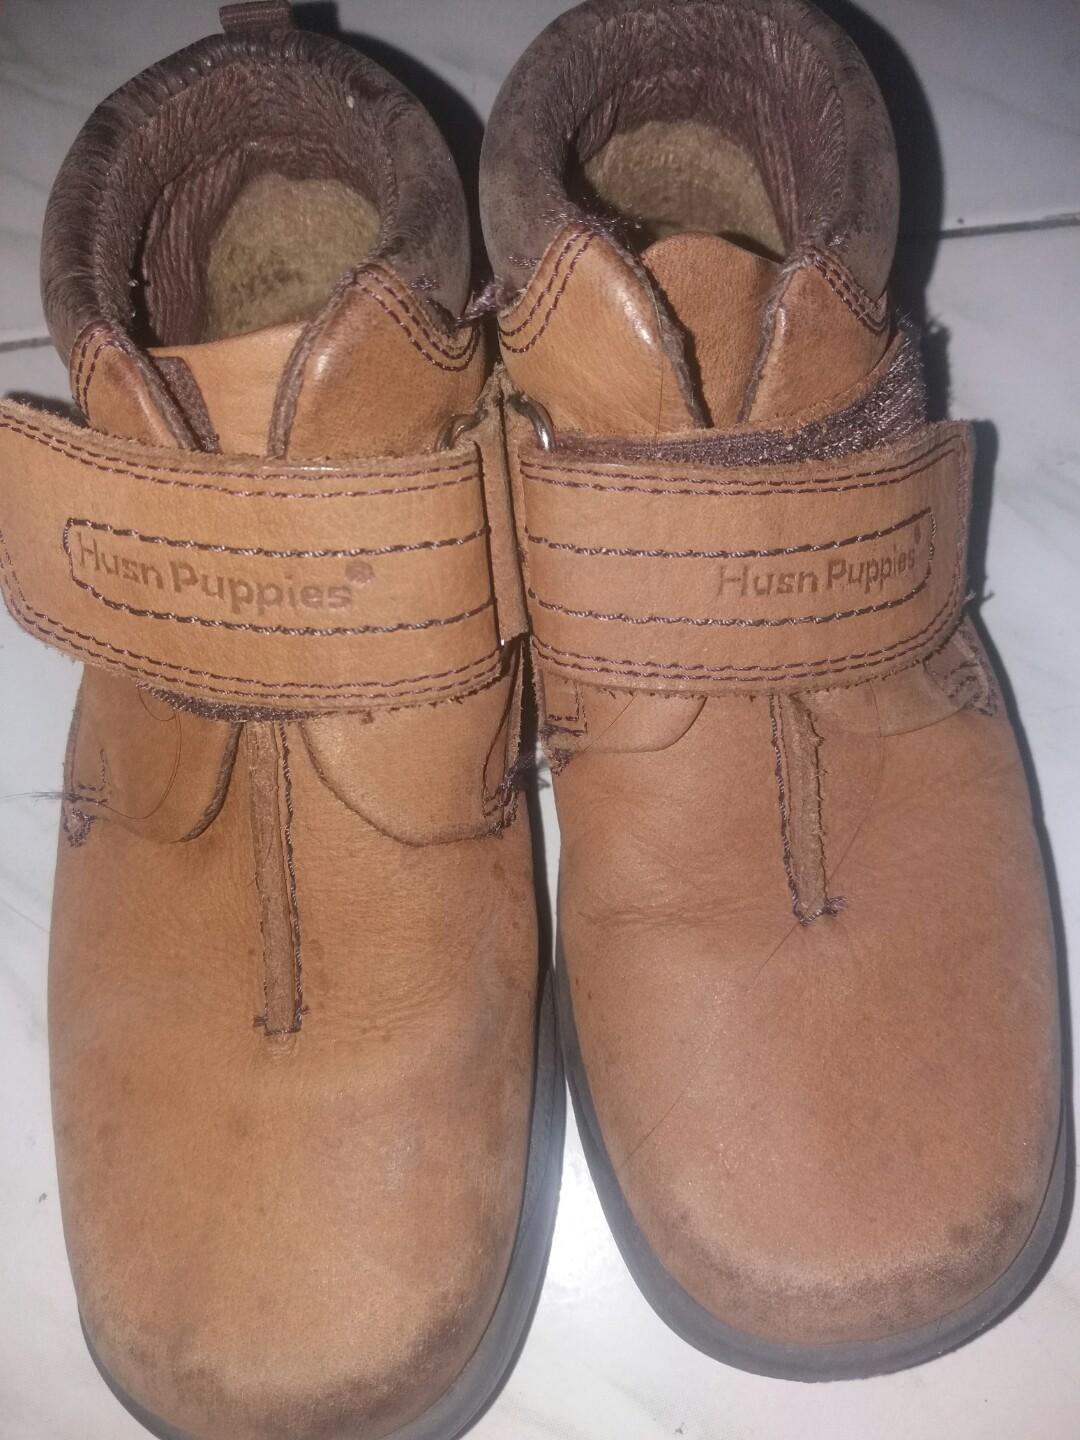 Hush Puppies Boots for Boys (size 11 